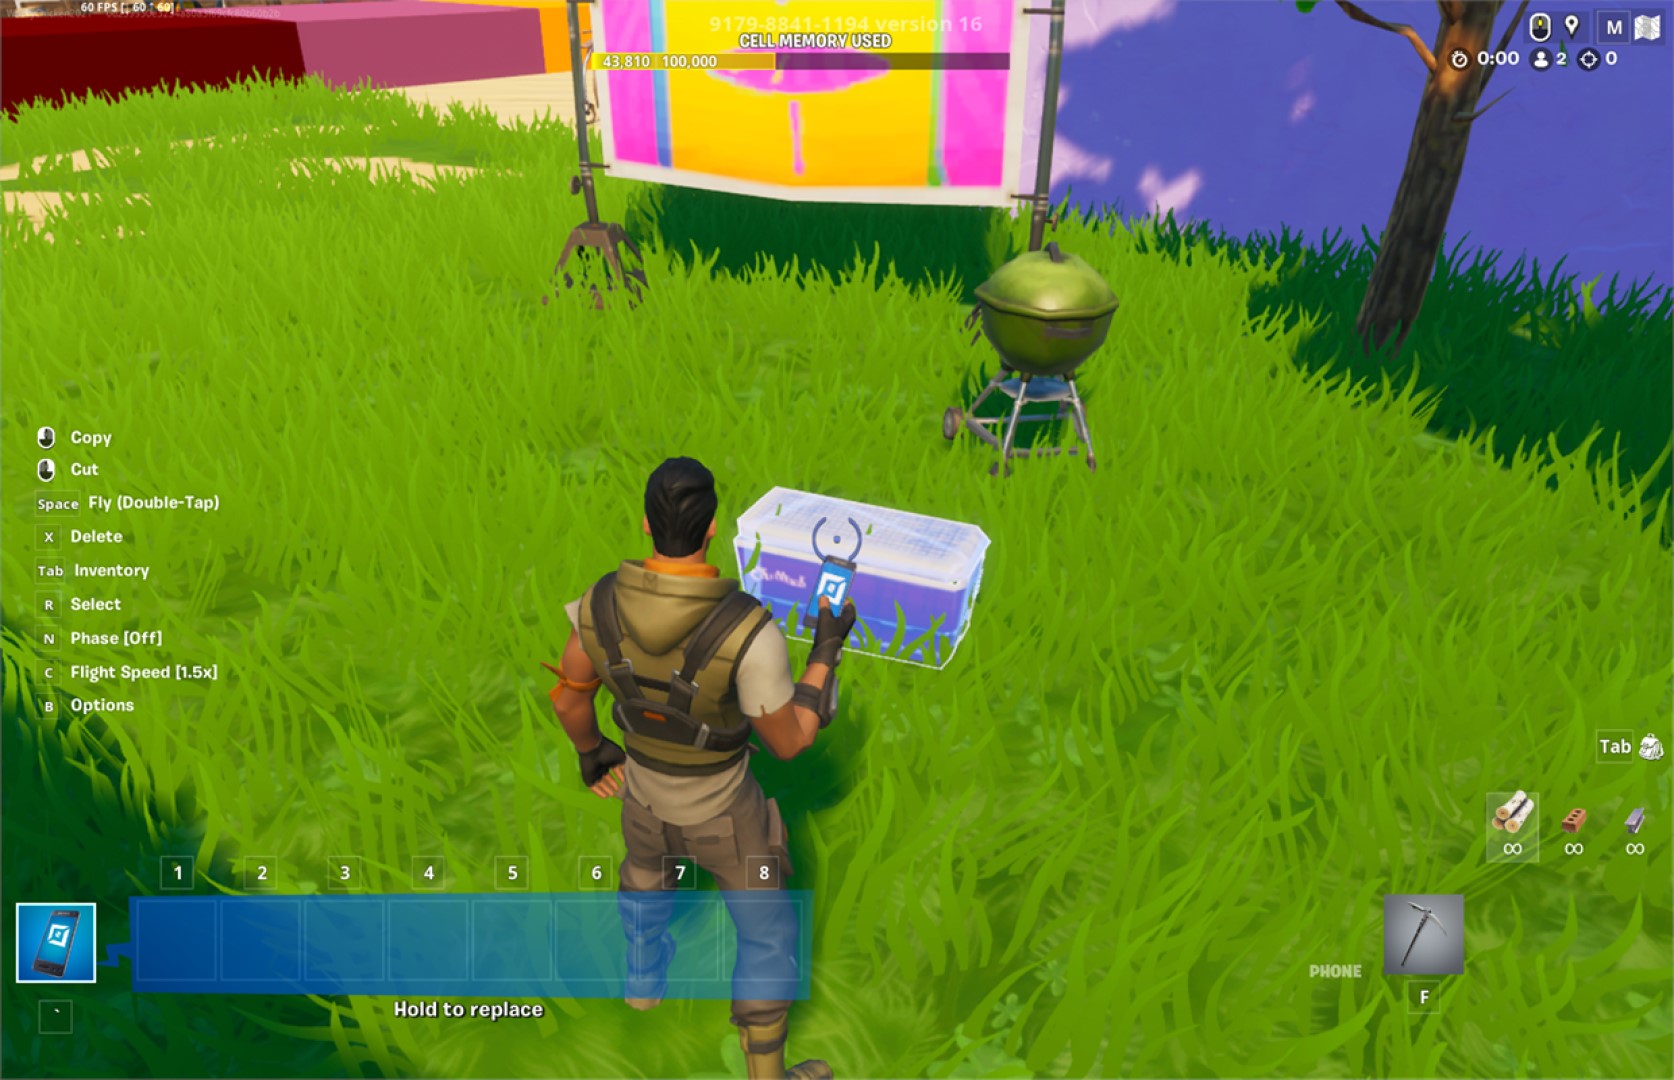 Fortnite Creative 2.0 could be a game changer, but only moderation will decide if it's for the best